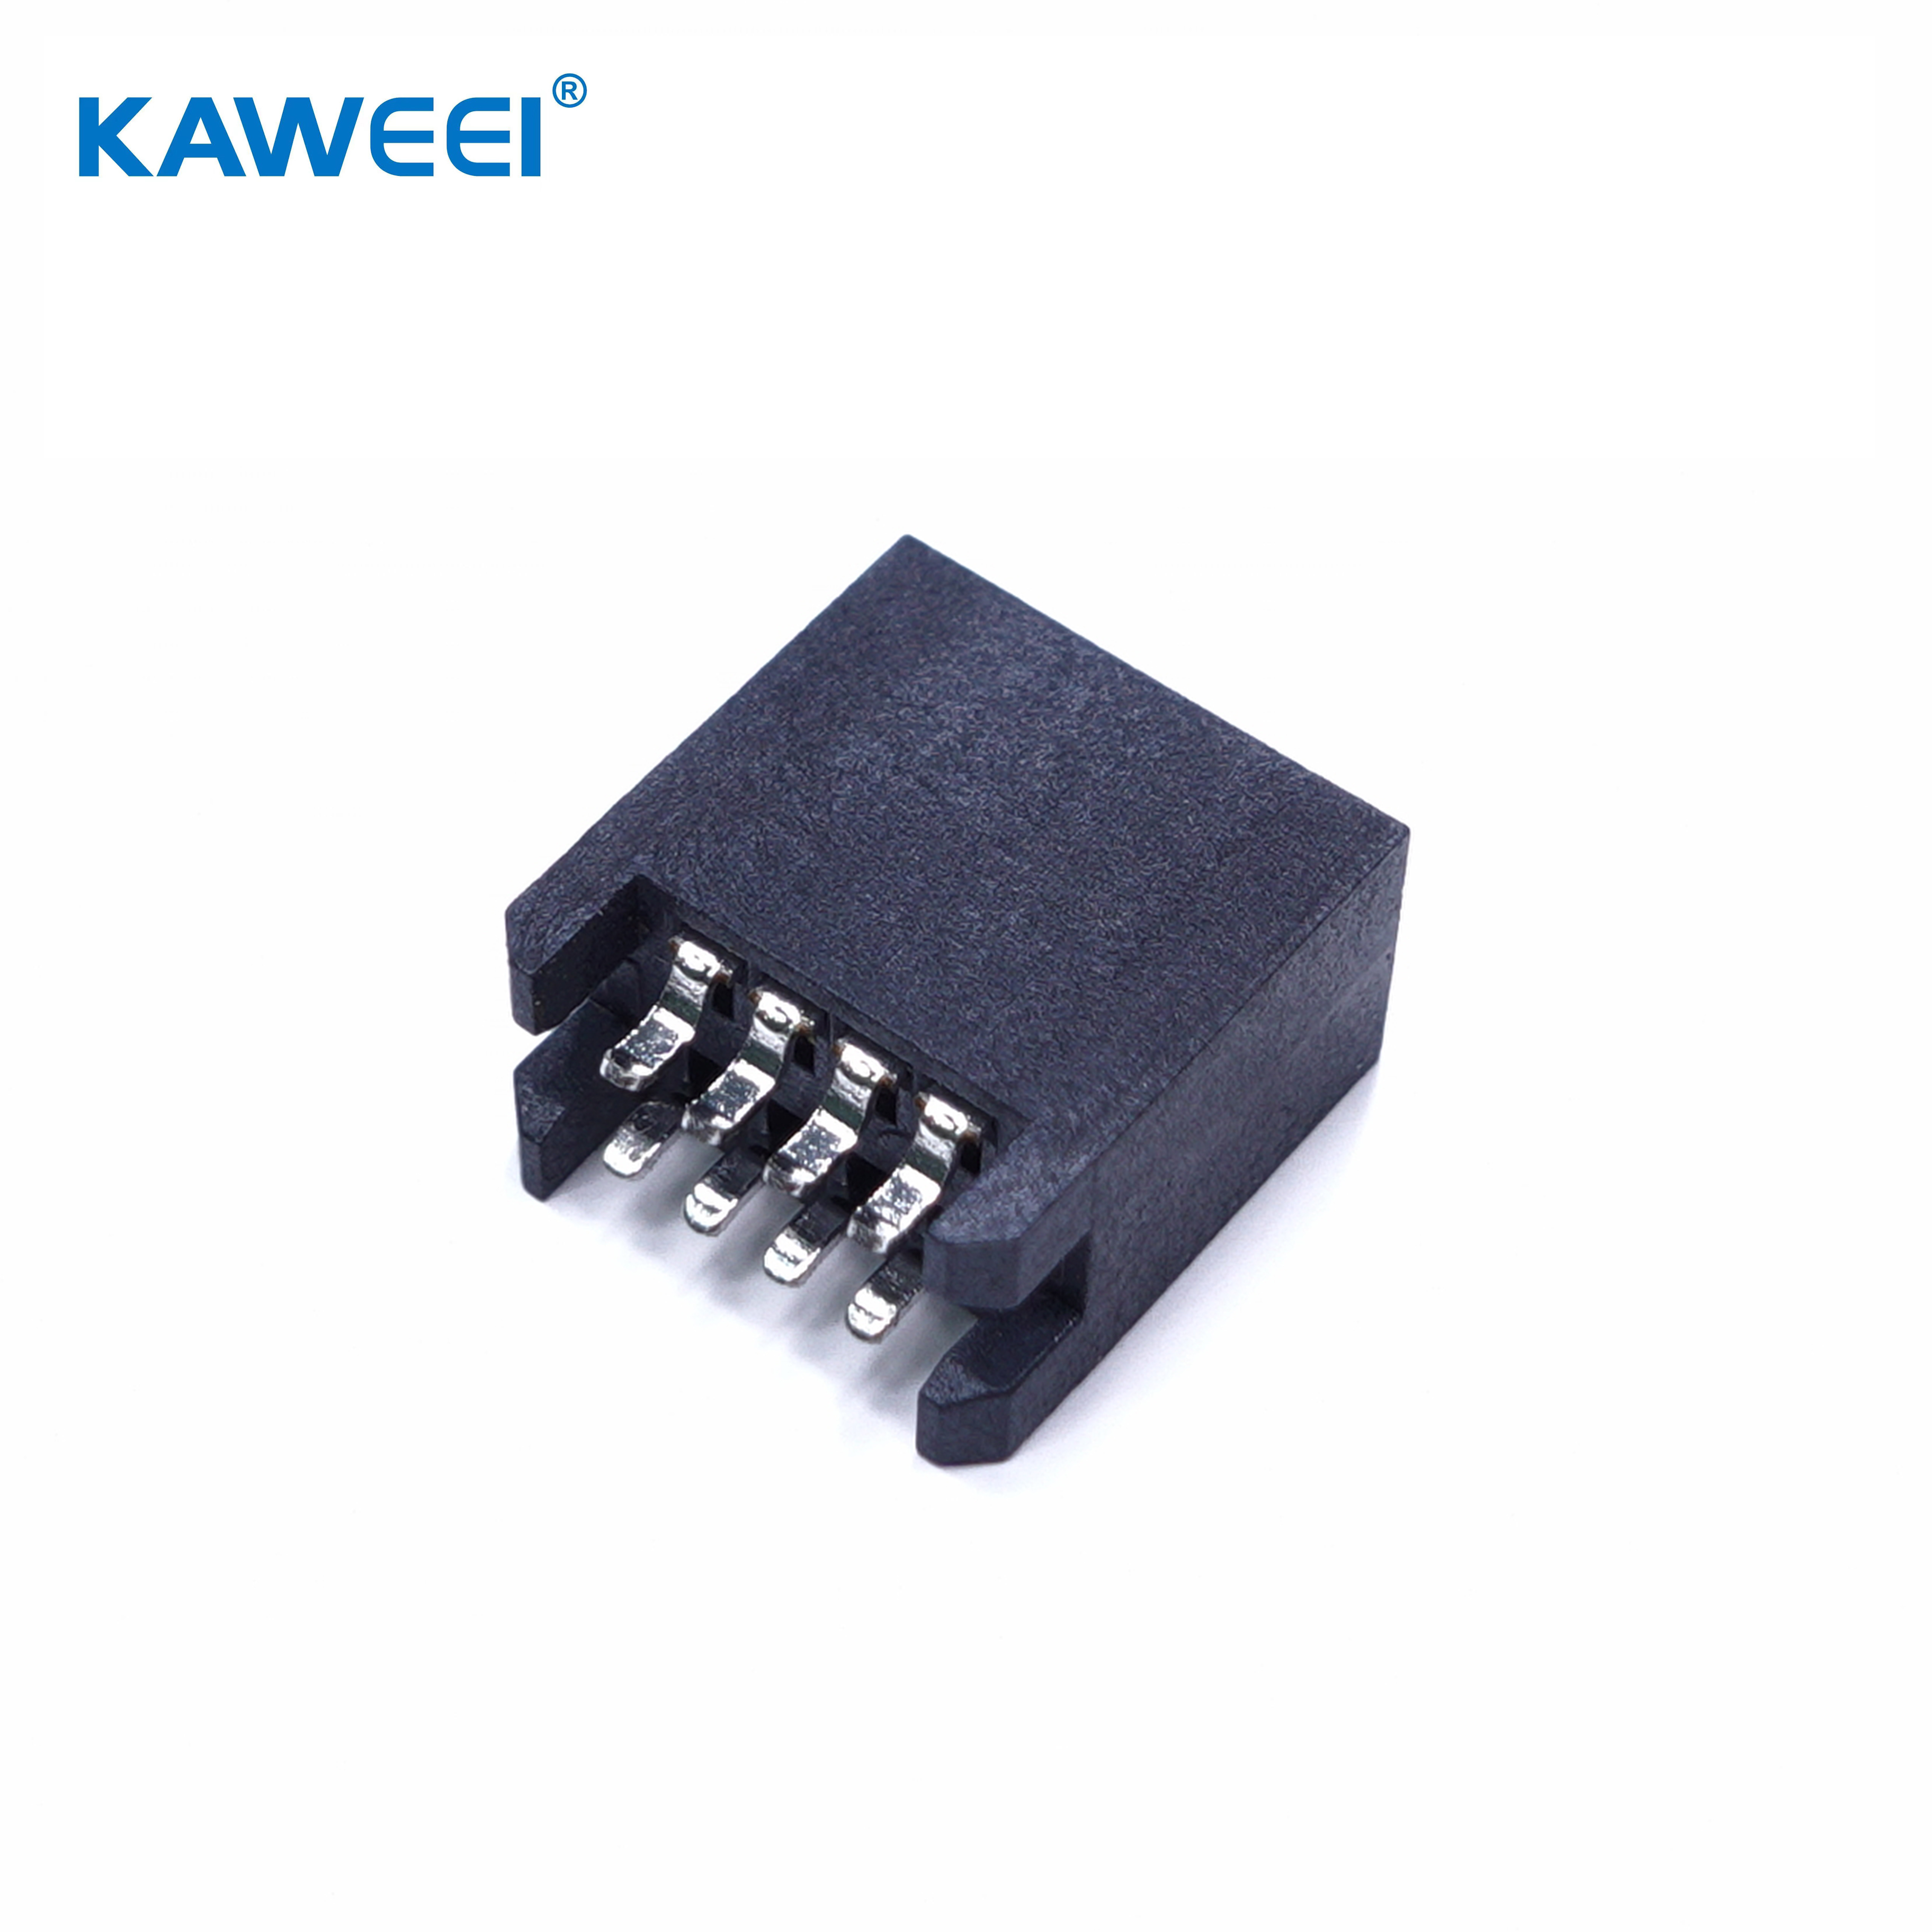 1.25mm Pitch Female Header Slot Connector Board to Board Connector PCB Connector